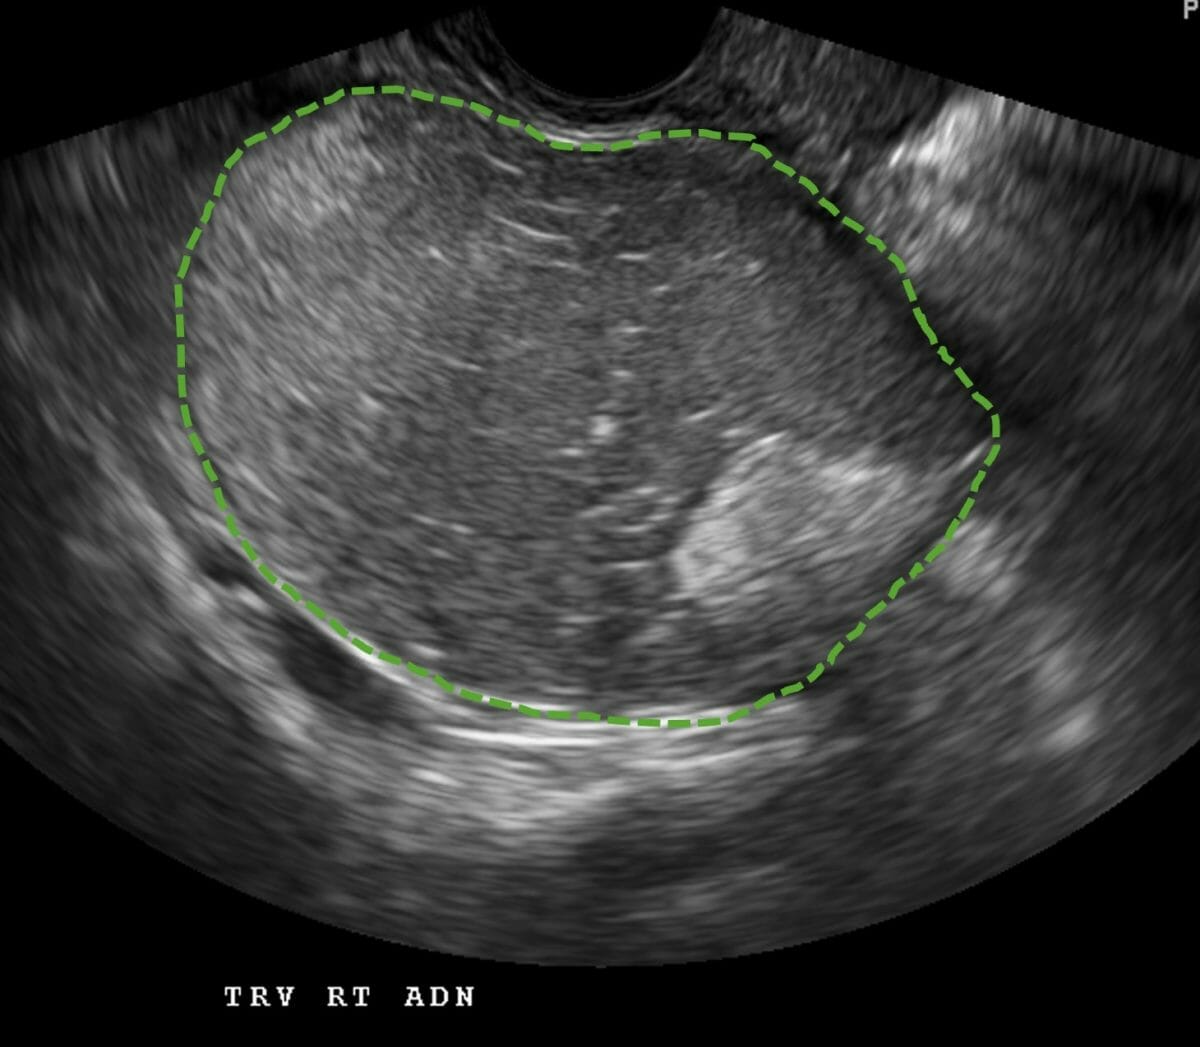 Ultrasound image showing a heterogeneous ovarian mass representing a dermoid cyst